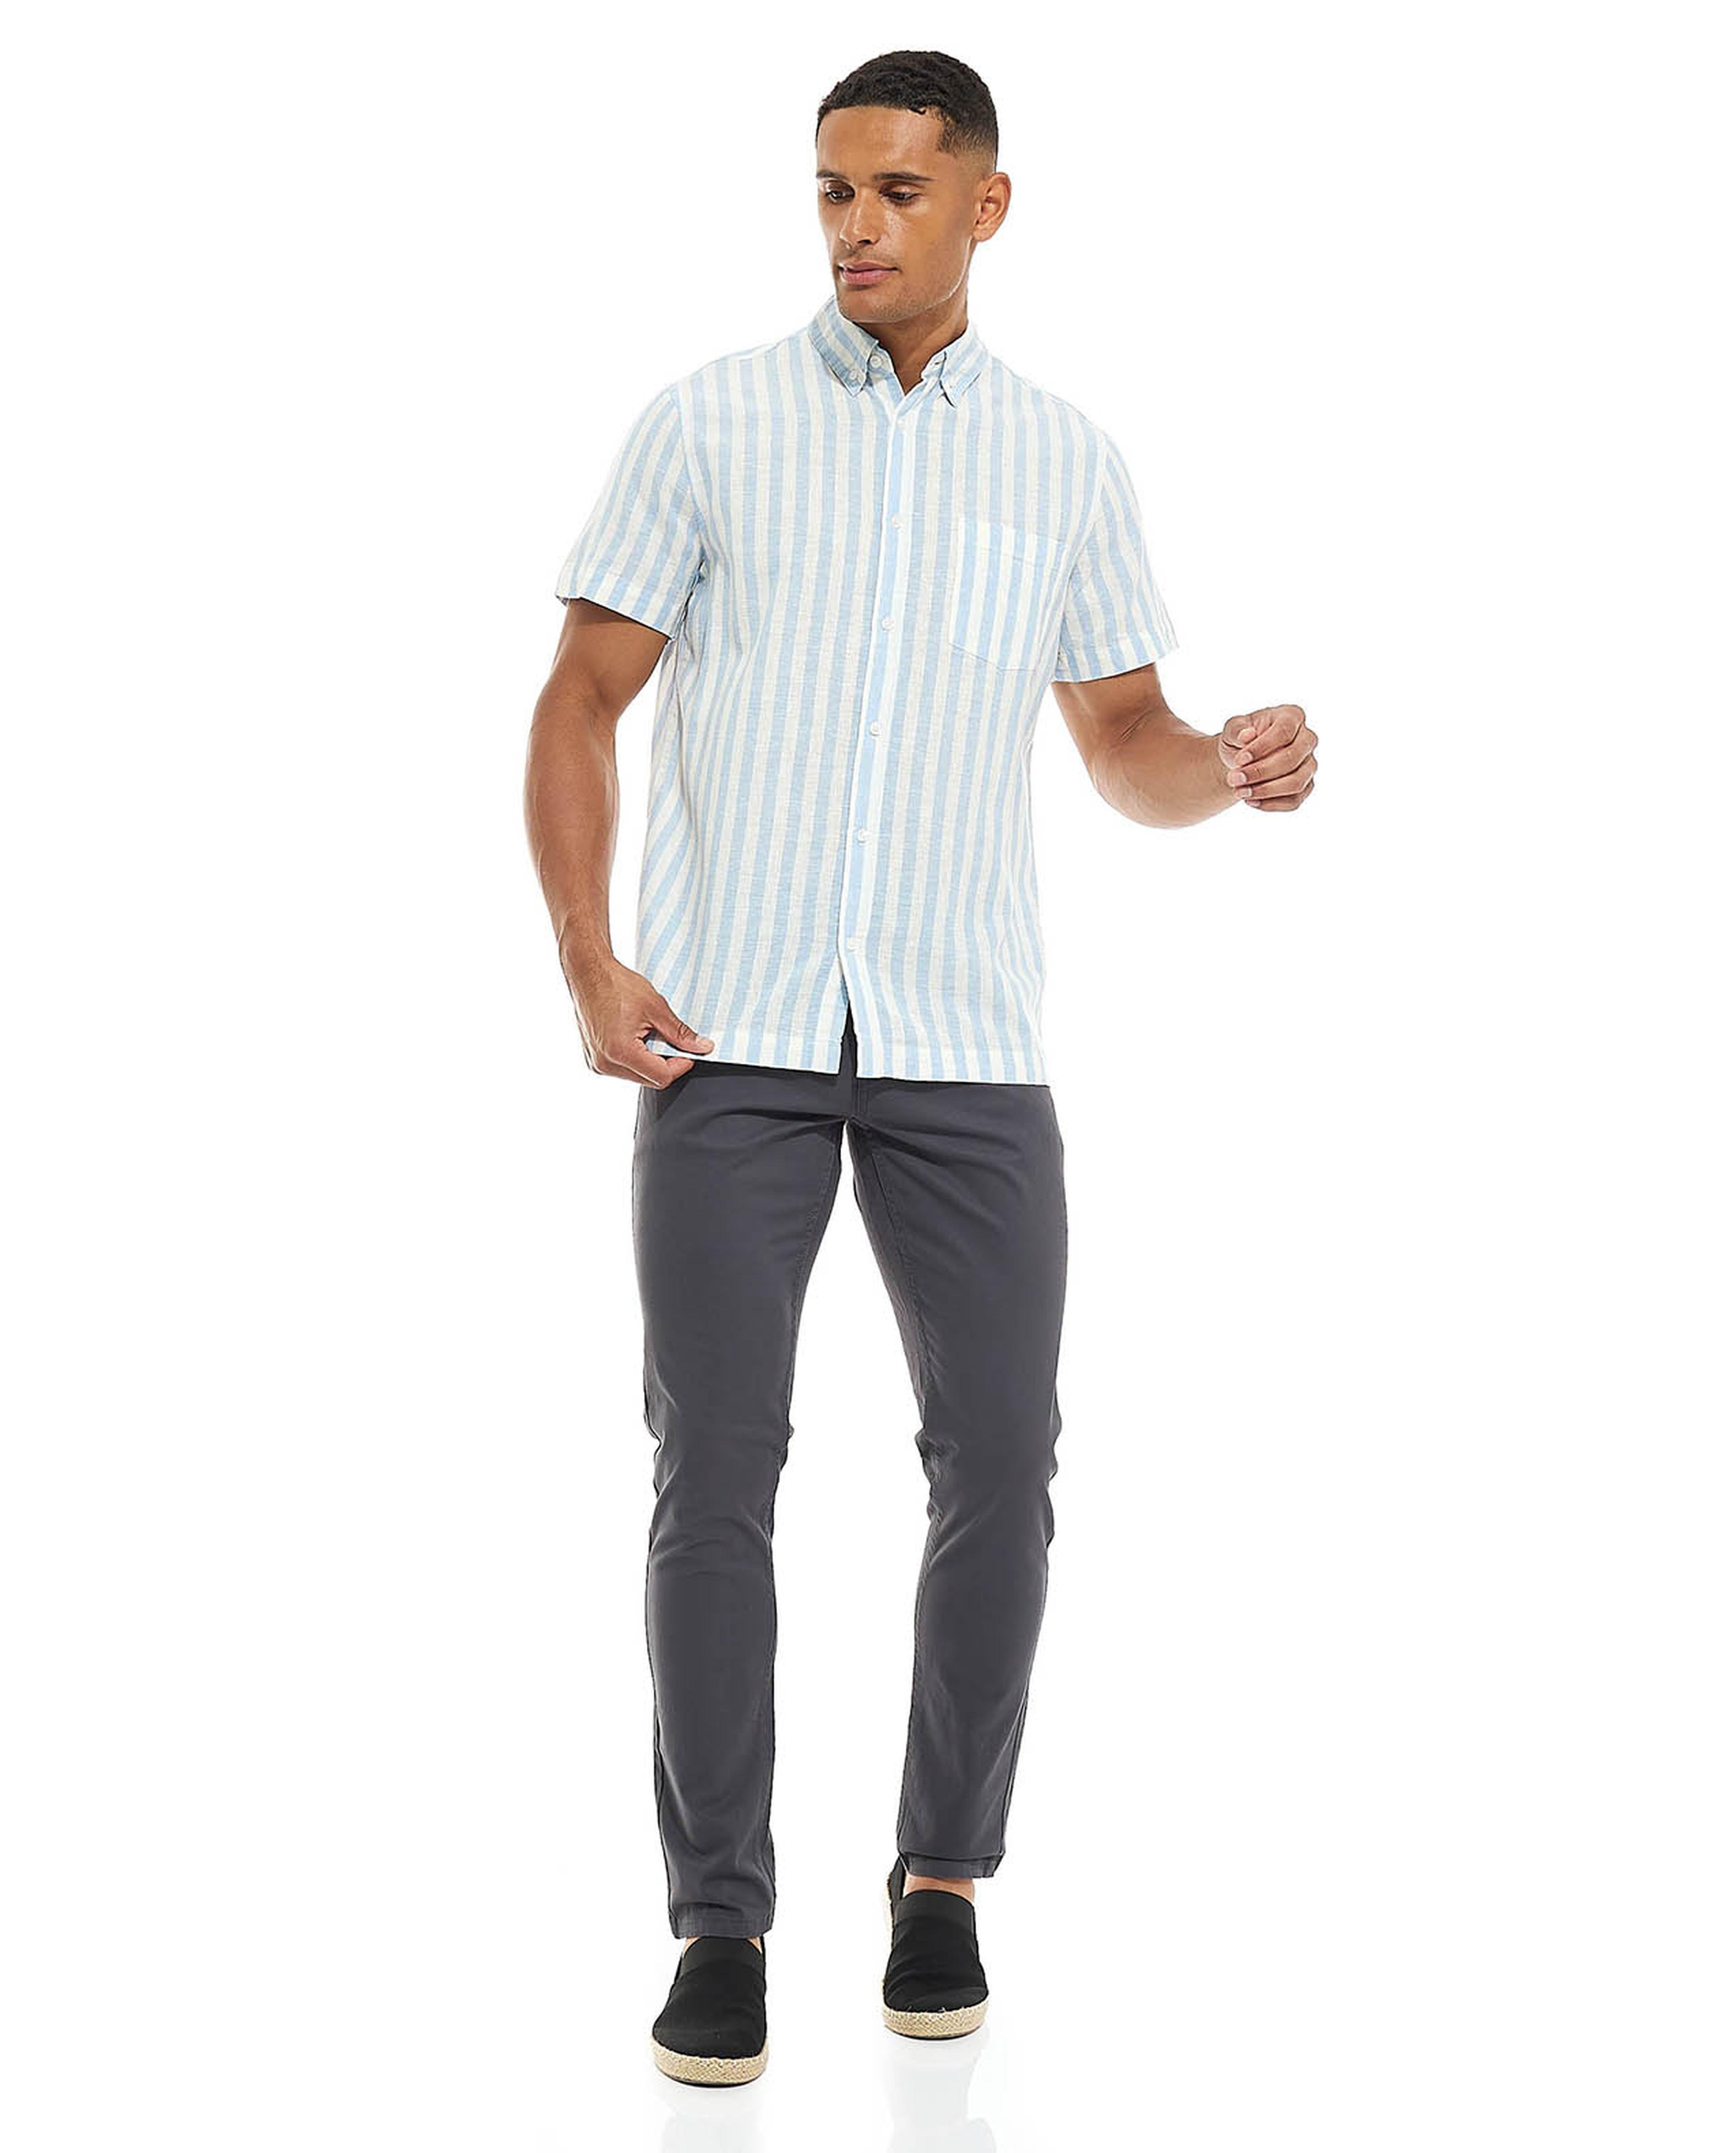 Striped Shirt with Button Down Collar and Short Sleeves